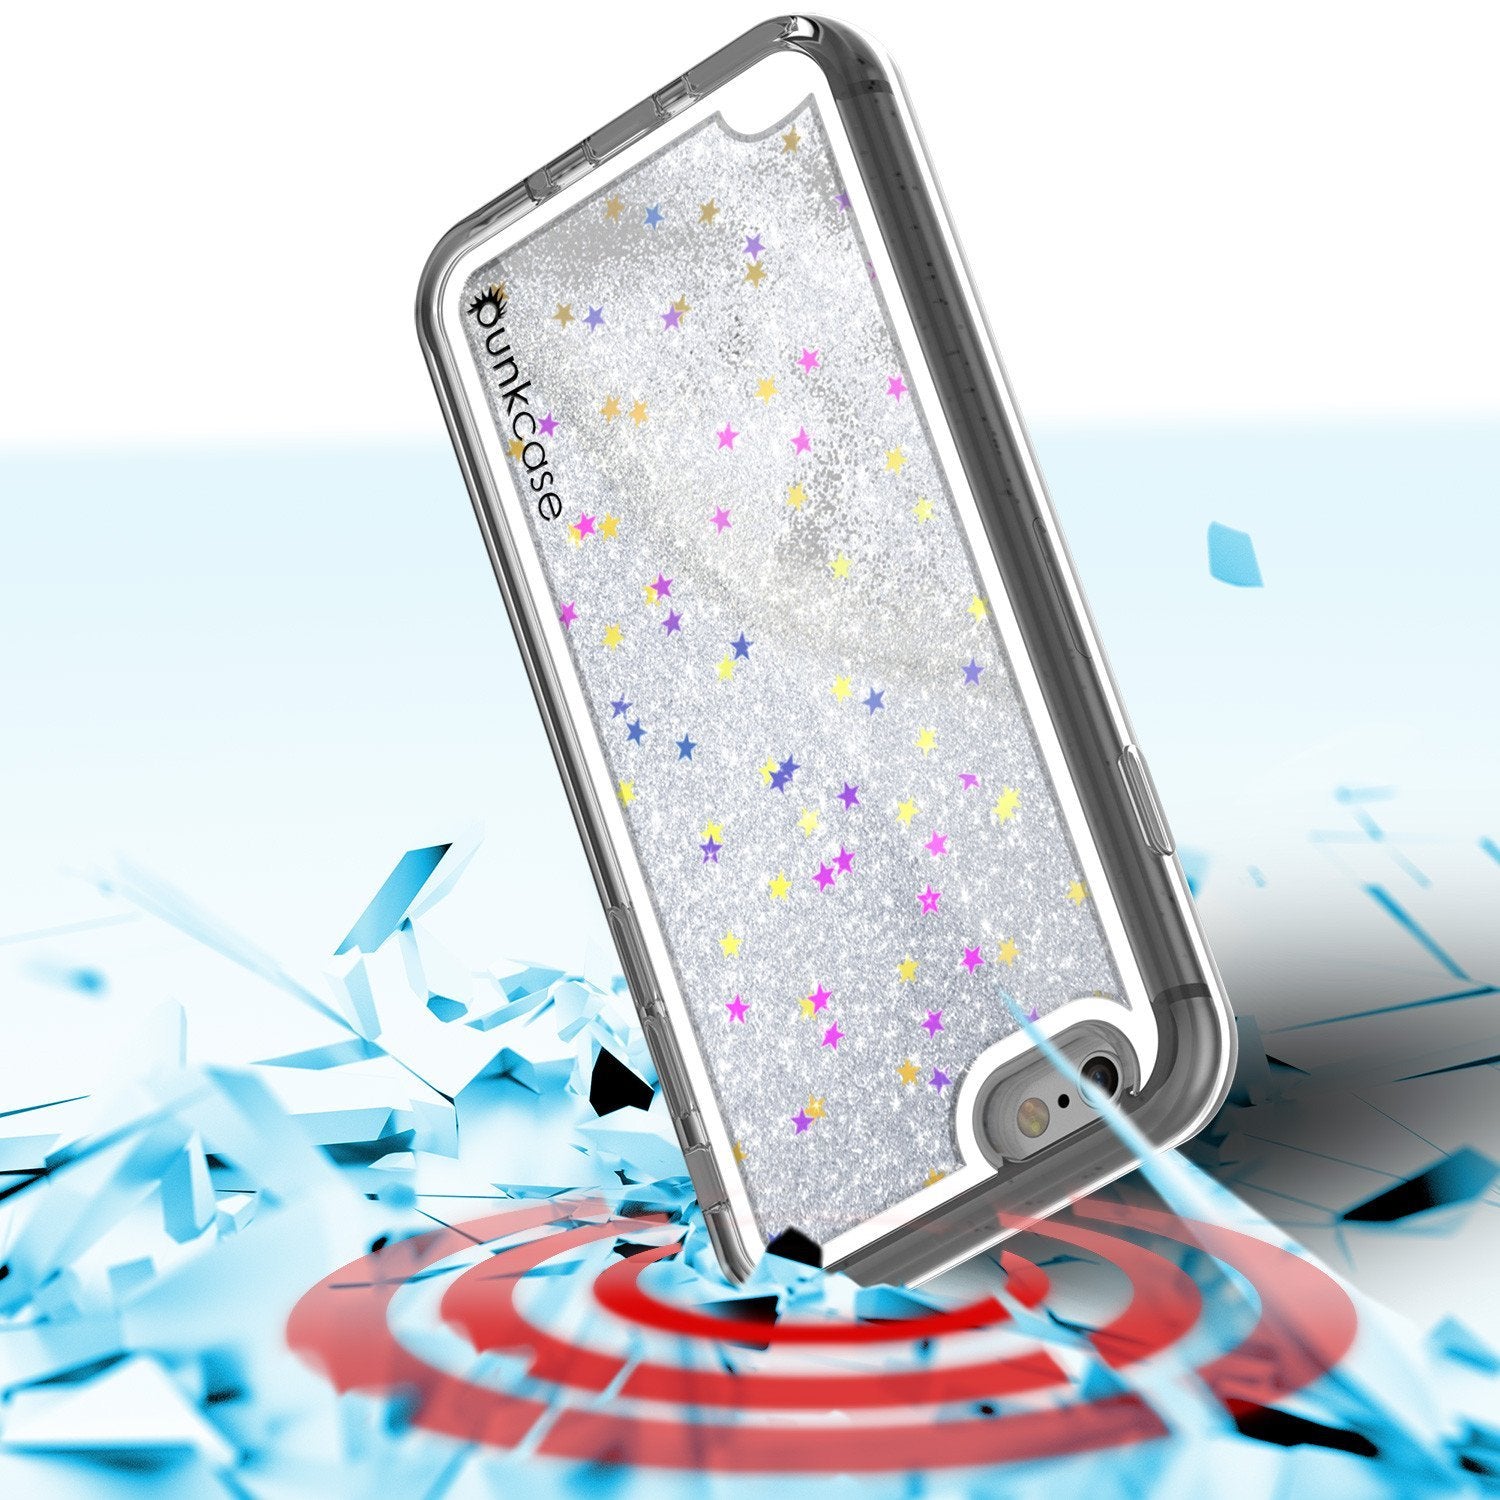 iPhone 8 Case, PunkCase LIQUID Silver Series, Protective Dual Layer Floating Glitter Cover - PunkCase NZ